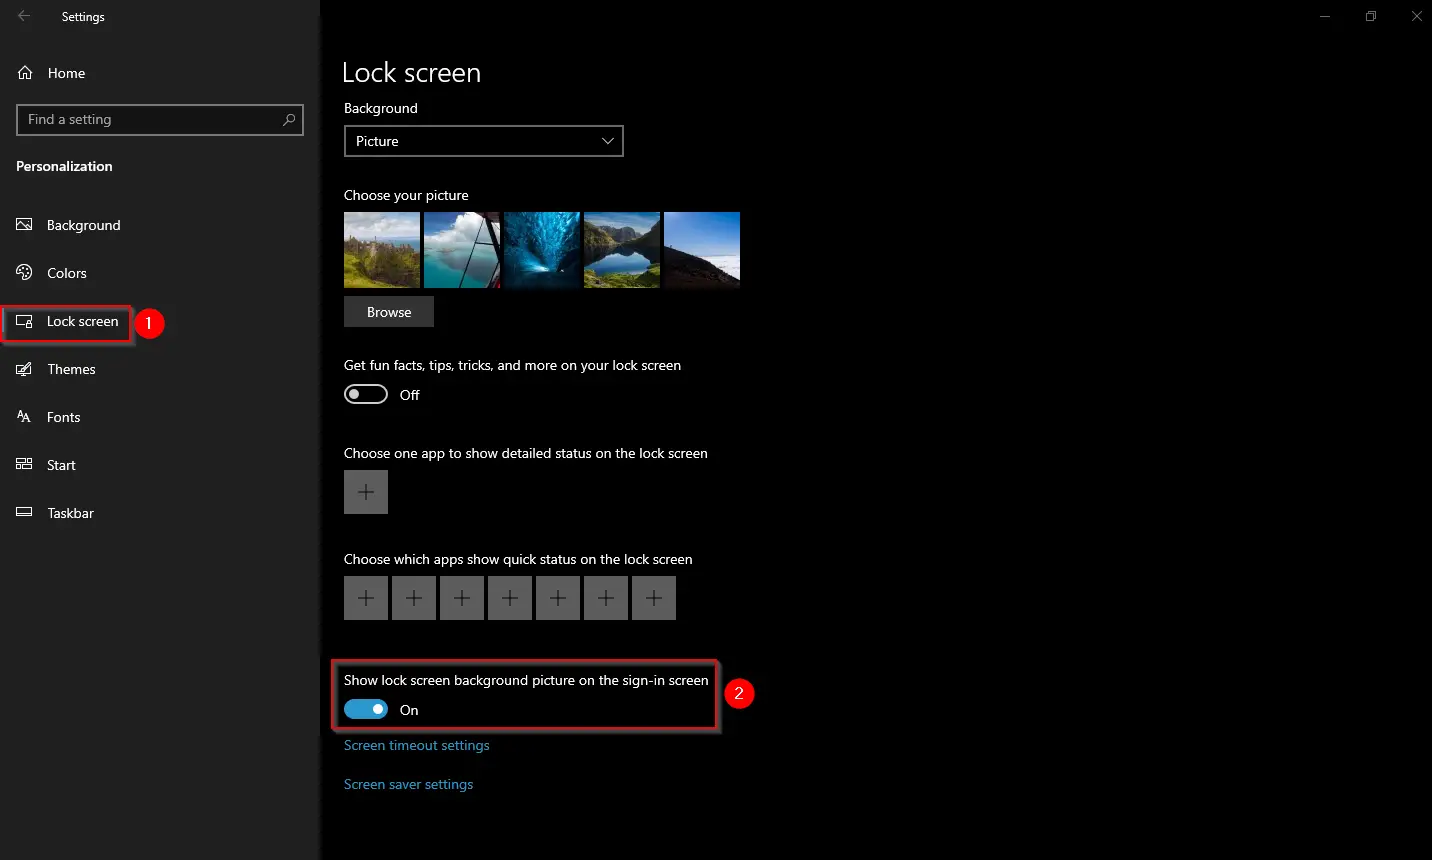 How To Change The Login Screen Background Image On Windows 10 Gear Up Windows 11 10